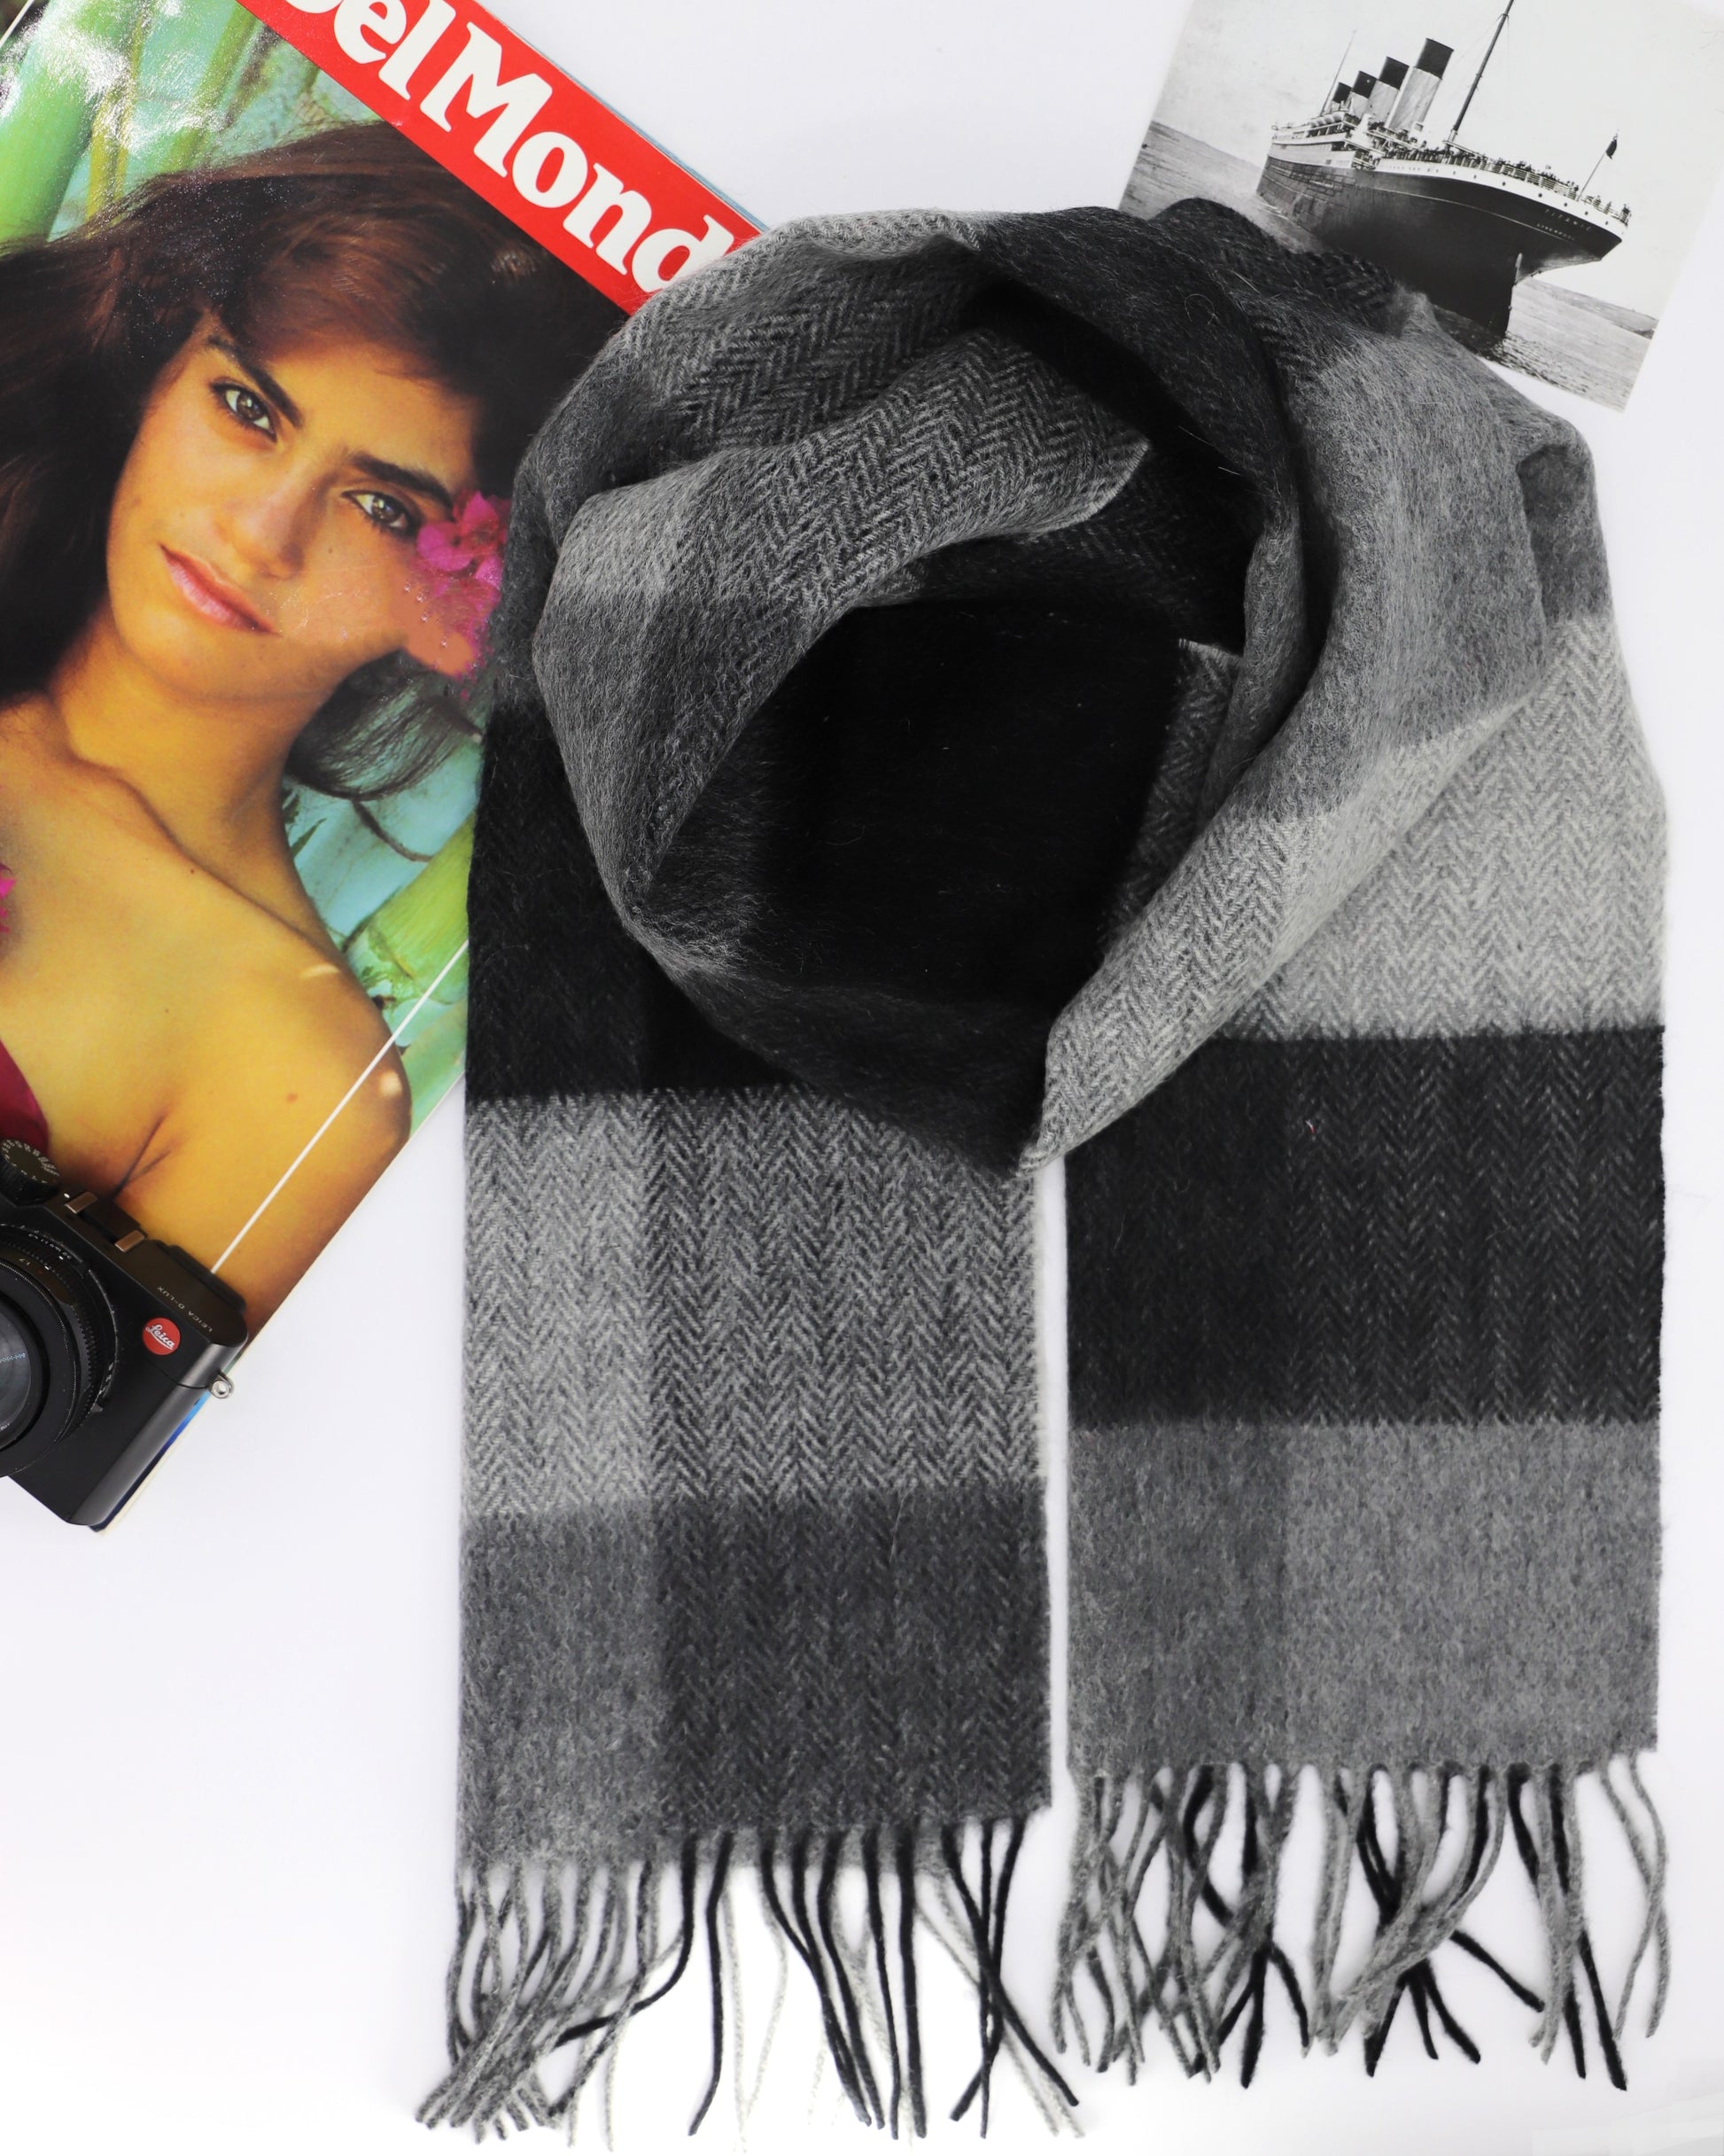 Wool Checked Scarf - Black and Gray - Scarf Designers